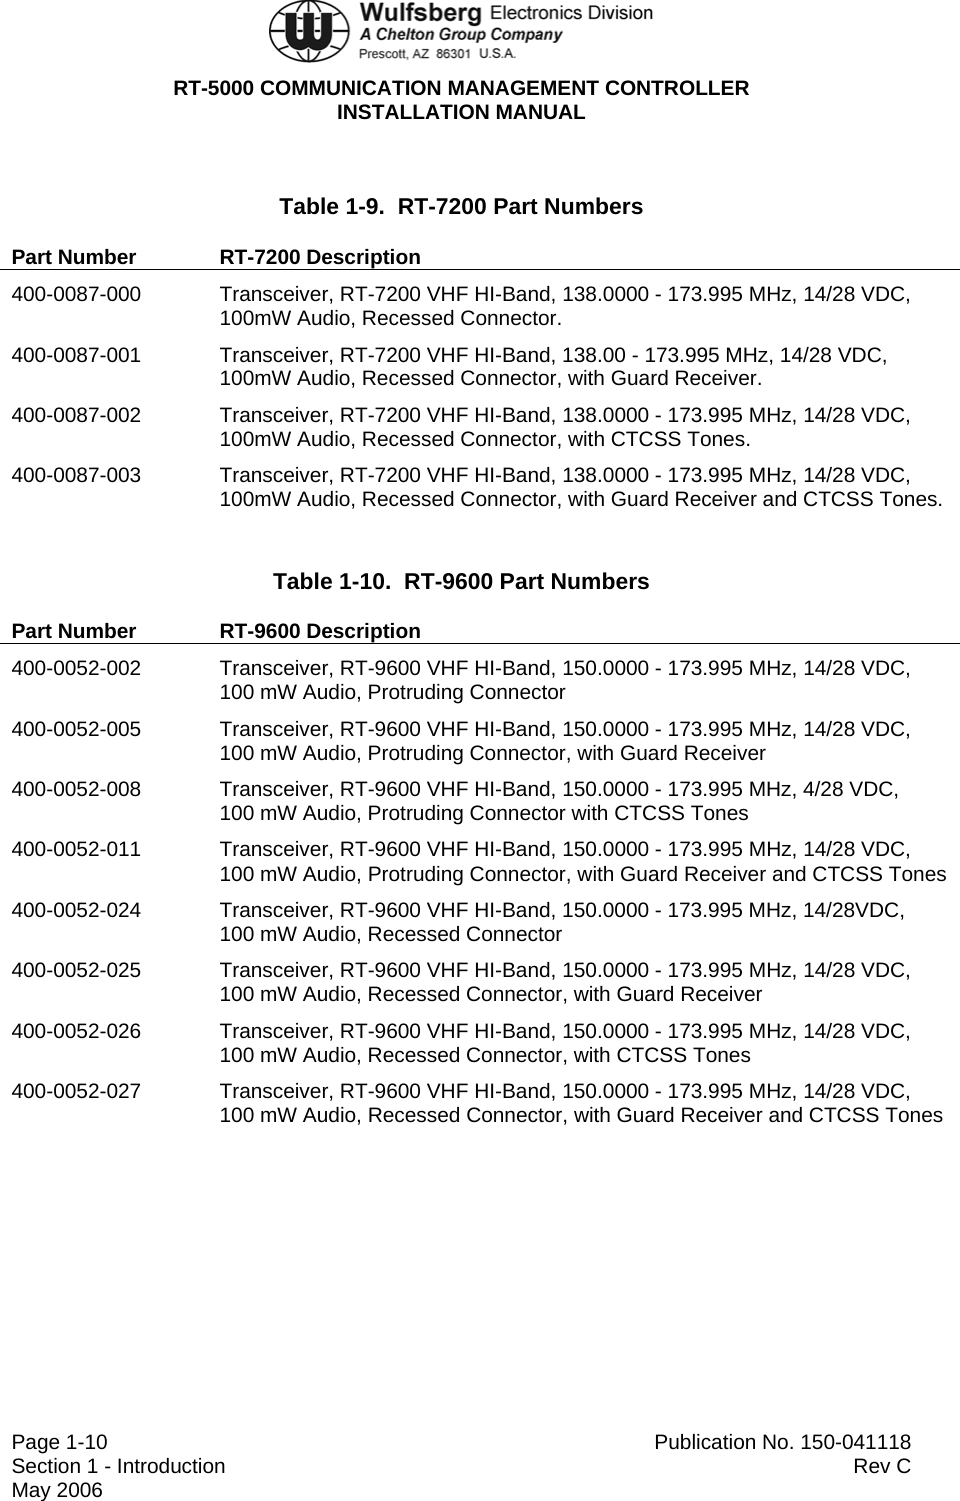  RT-5000 COMMUNICATION MANAGEMENT CONTROLLER INSTALLATION MANUAL  Page 1-10  Publication No. 150-041118 Section 1 - Introduction  Rev C  May 2006 Table 1-9.  RT-7200 Part Numbers Part Number  RT-7200 Description 400-0087-000  Transceiver, RT-7200 VHF HI-Band, 138.0000 - 173.995 MHz, 14/28 VDC,  100mW Audio, Recessed Connector. 400-0087-001  Transceiver, RT-7200 VHF HI-Band, 138.00 - 173.995 MHz, 14/28 VDC,  100mW Audio, Recessed Connector, with Guard Receiver. 400-0087-002  Transceiver, RT-7200 VHF HI-Band, 138.0000 - 173.995 MHz, 14/28 VDC,  100mW Audio, Recessed Connector, with CTCSS Tones. 400-0087-003  Transceiver, RT-7200 VHF HI-Band, 138.0000 - 173.995 MHz, 14/28 VDC,  100mW Audio, Recessed Connector, with Guard Receiver and CTCSS Tones. Table 1-10.  RT-9600 Part Numbers Part Number  RT-9600 Description 400-0052-002  Transceiver, RT-9600 VHF HI-Band, 150.0000 - 173.995 MHz, 14/28 VDC,  100 mW Audio, Protruding Connector 400-0052-005  Transceiver, RT-9600 VHF HI-Band, 150.0000 - 173.995 MHz, 14/28 VDC,  100 mW Audio, Protruding Connector, with Guard Receiver 400-0052-008  Transceiver, RT-9600 VHF HI-Band, 150.0000 - 173.995 MHz, 4/28 VDC,  100 mW Audio, Protruding Connector with CTCSS Tones 400-0052-011  Transceiver, RT-9600 VHF HI-Band, 150.0000 - 173.995 MHz, 14/28 VDC,  100 mW Audio, Protruding Connector, with Guard Receiver and CTCSS Tones 400-0052-024  Transceiver, RT-9600 VHF HI-Band, 150.0000 - 173.995 MHz, 14/28VDC,  100 mW Audio, Recessed Connector 400-0052-025  Transceiver, RT-9600 VHF HI-Band, 150.0000 - 173.995 MHz, 14/28 VDC,  100 mW Audio, Recessed Connector, with Guard Receiver 400-0052-026  Transceiver, RT-9600 VHF HI-Band, 150.0000 - 173.995 MHz, 14/28 VDC,  100 mW Audio, Recessed Connector, with CTCSS Tones 400-0052-027  Transceiver, RT-9600 VHF HI-Band, 150.0000 - 173.995 MHz, 14/28 VDC,  100 mW Audio, Recessed Connector, with Guard Receiver and CTCSS Tones 